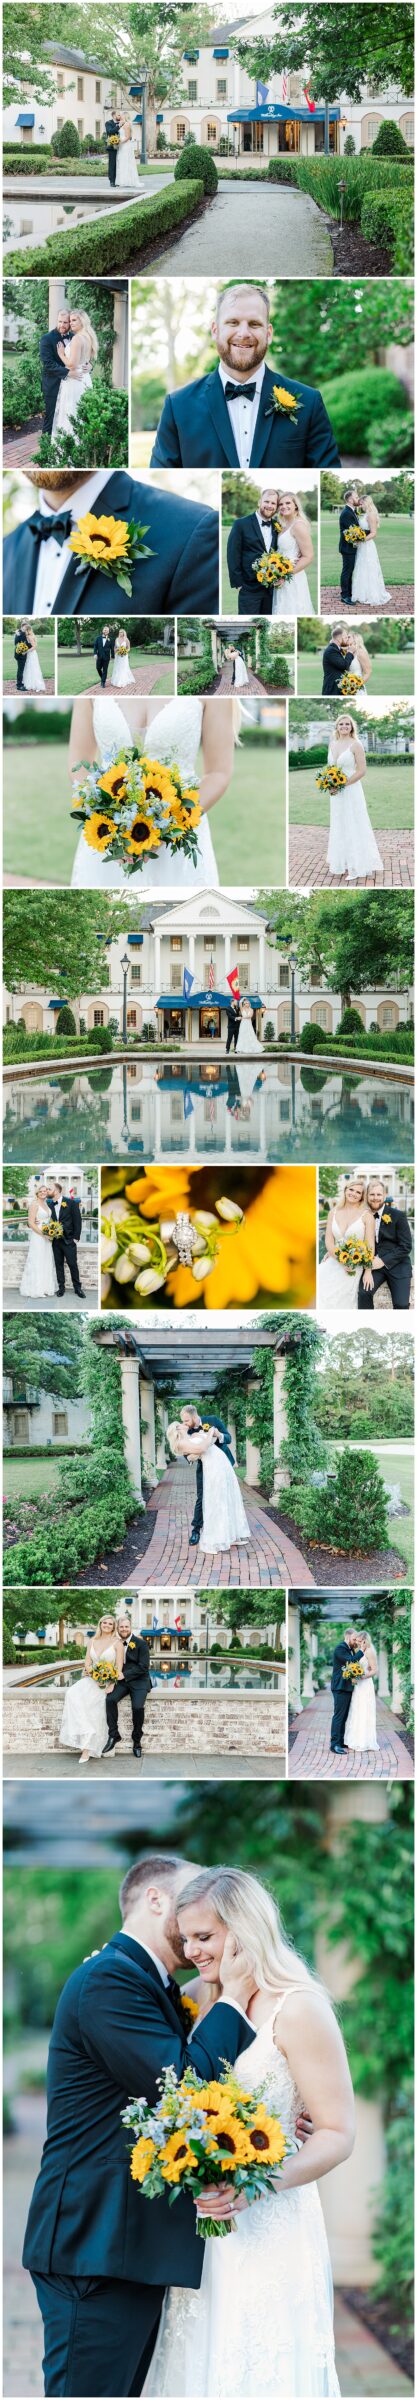 collage of images from Haley and Jacob's Colonial Williamsburg wedding, complete with sunflowers and dancing the night away at the Williamsburg Inn